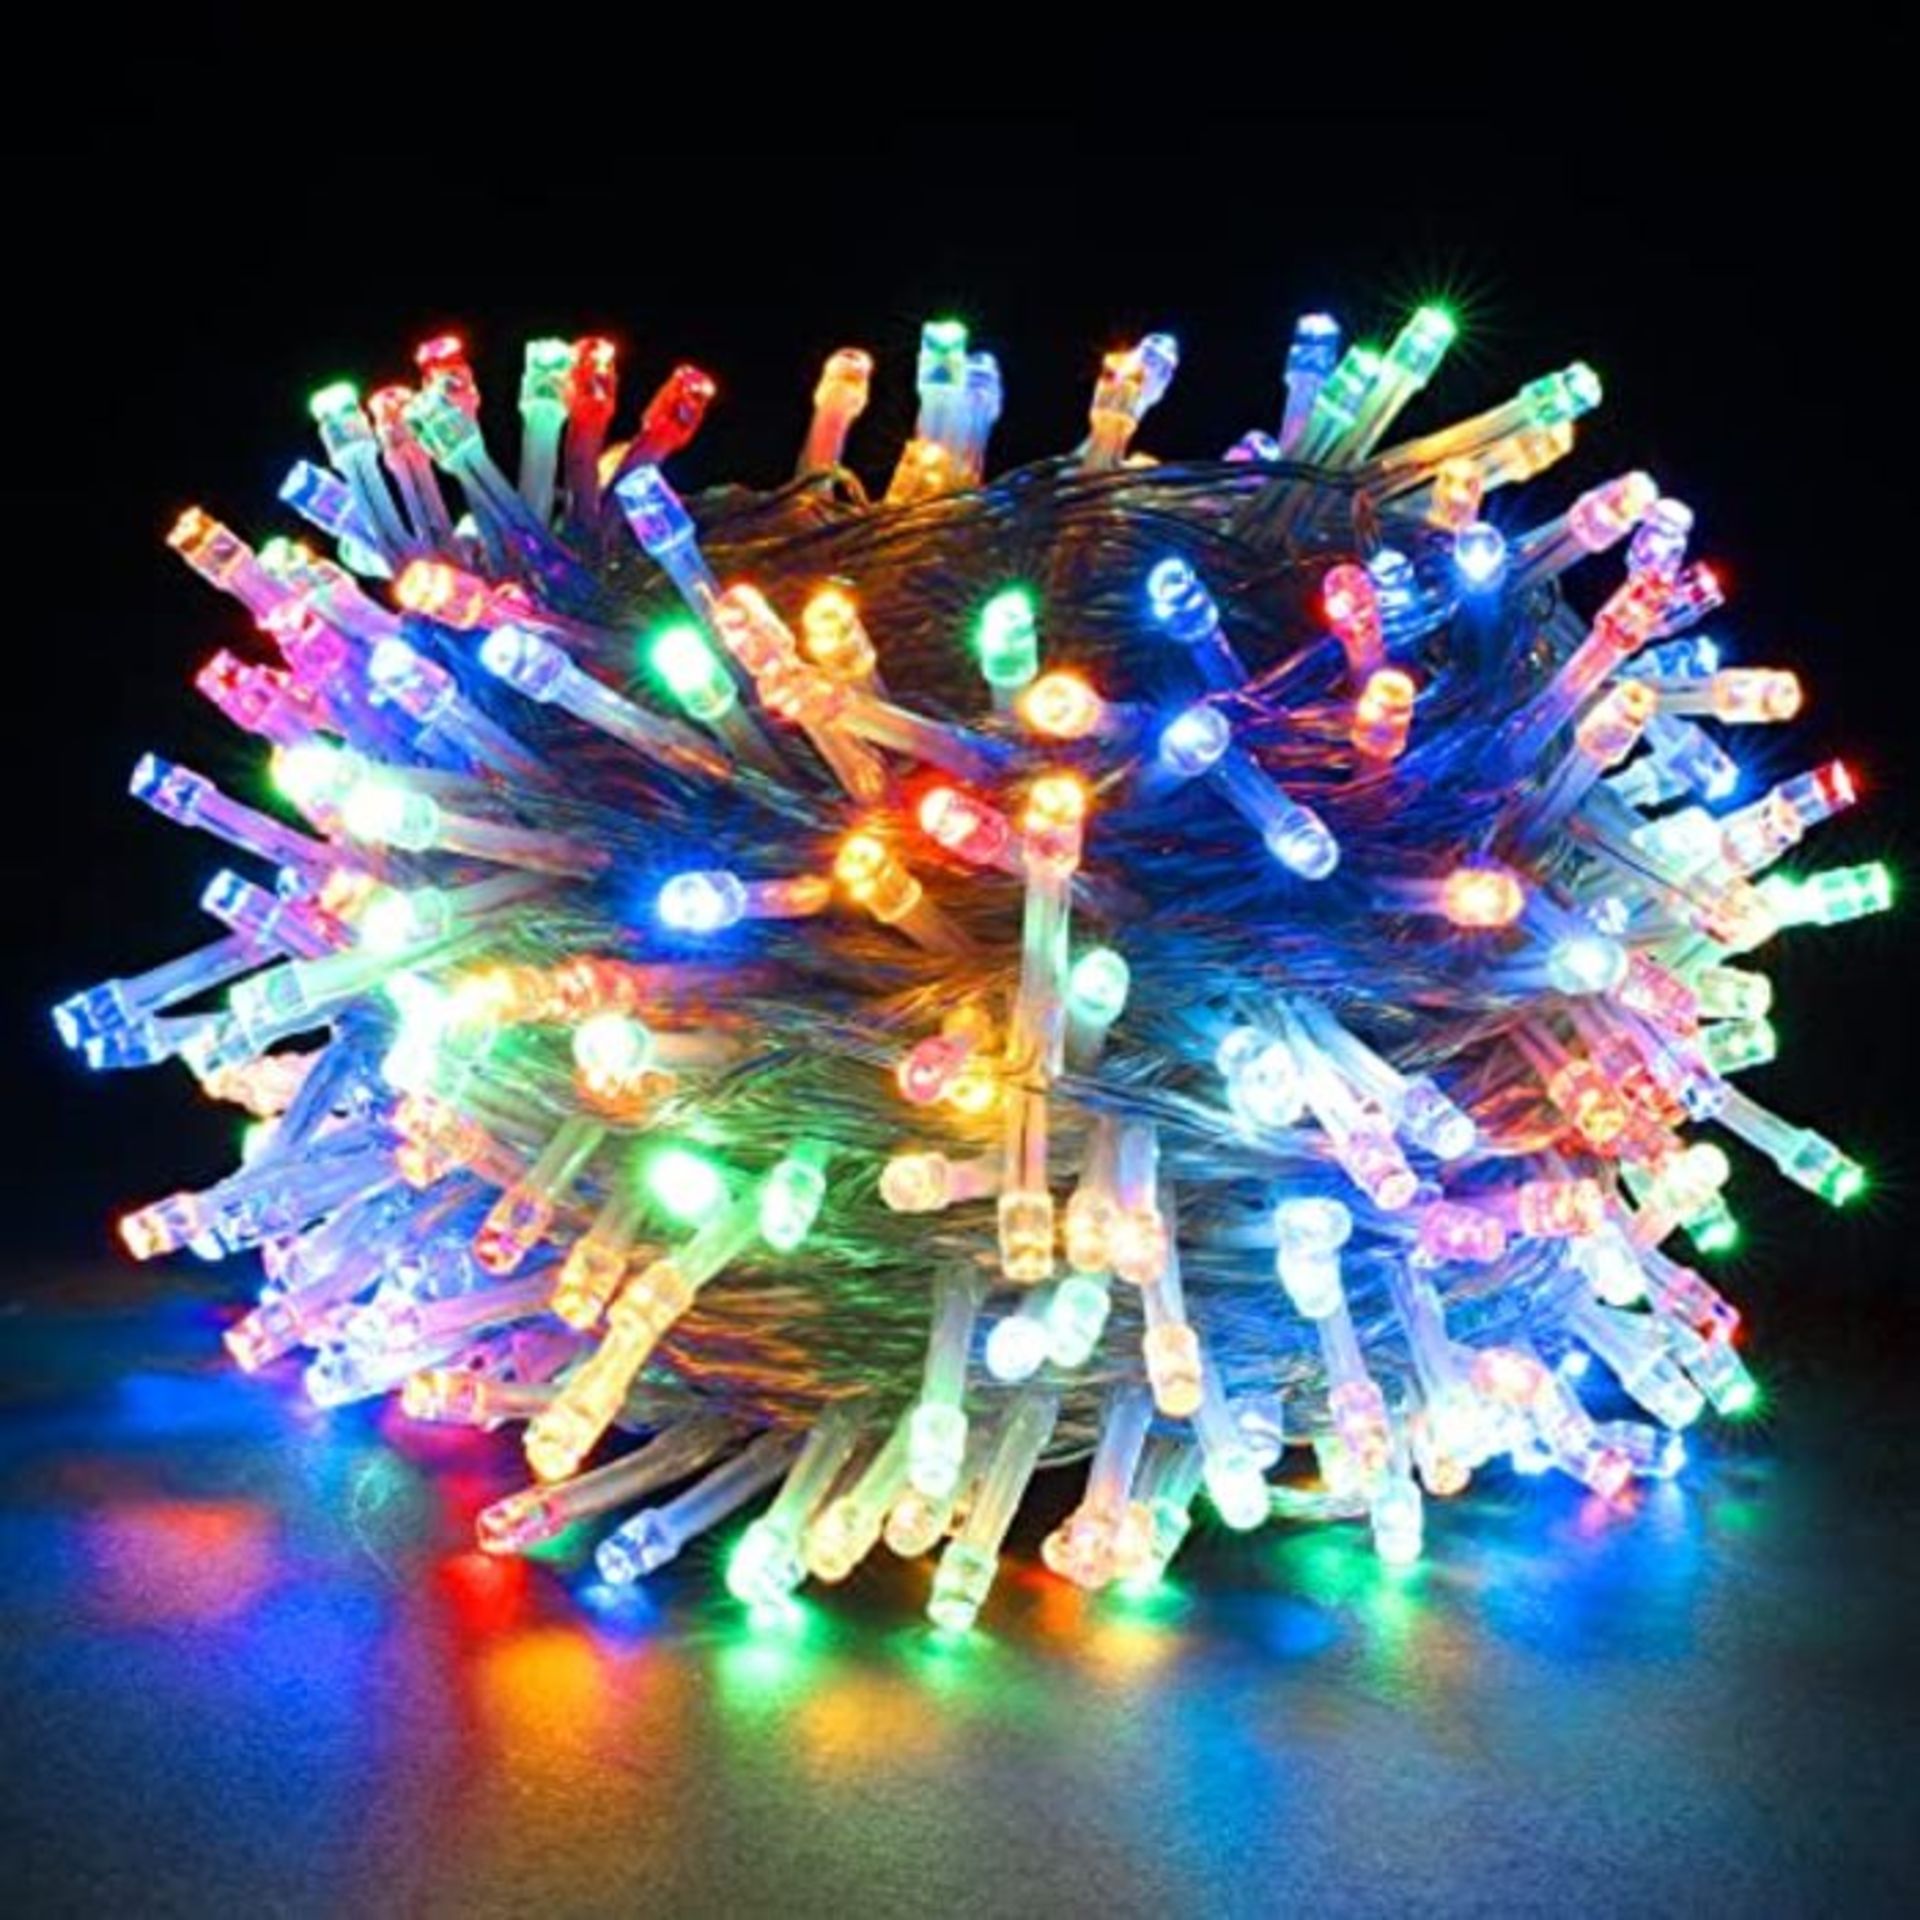 Pms Fairy Lights with Transparent Cable and LED Lights